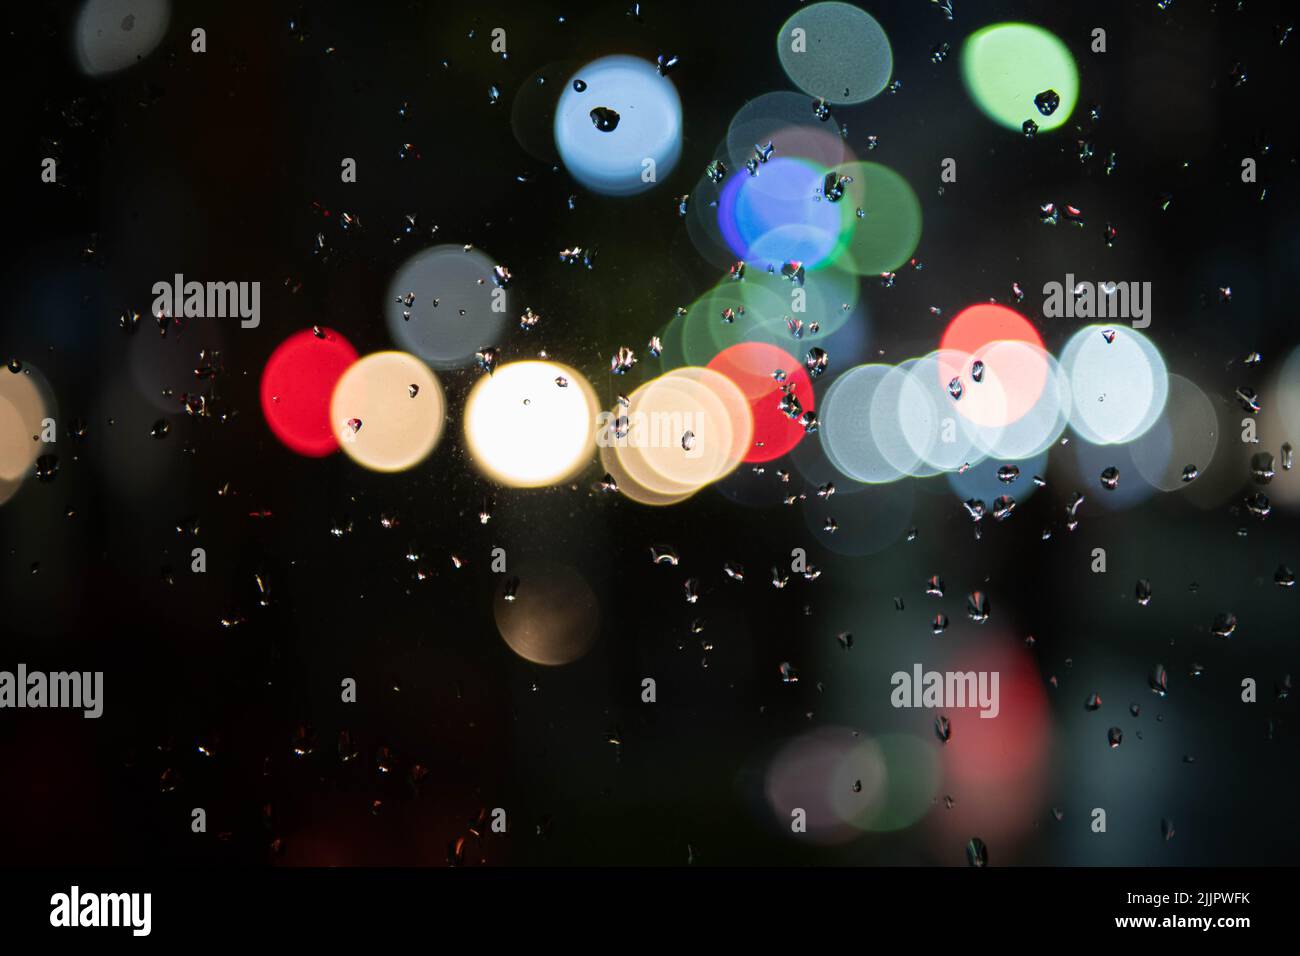 Image of raindrops on the window at night in the city, burry background, abstract bokeh, for background Stock Photo